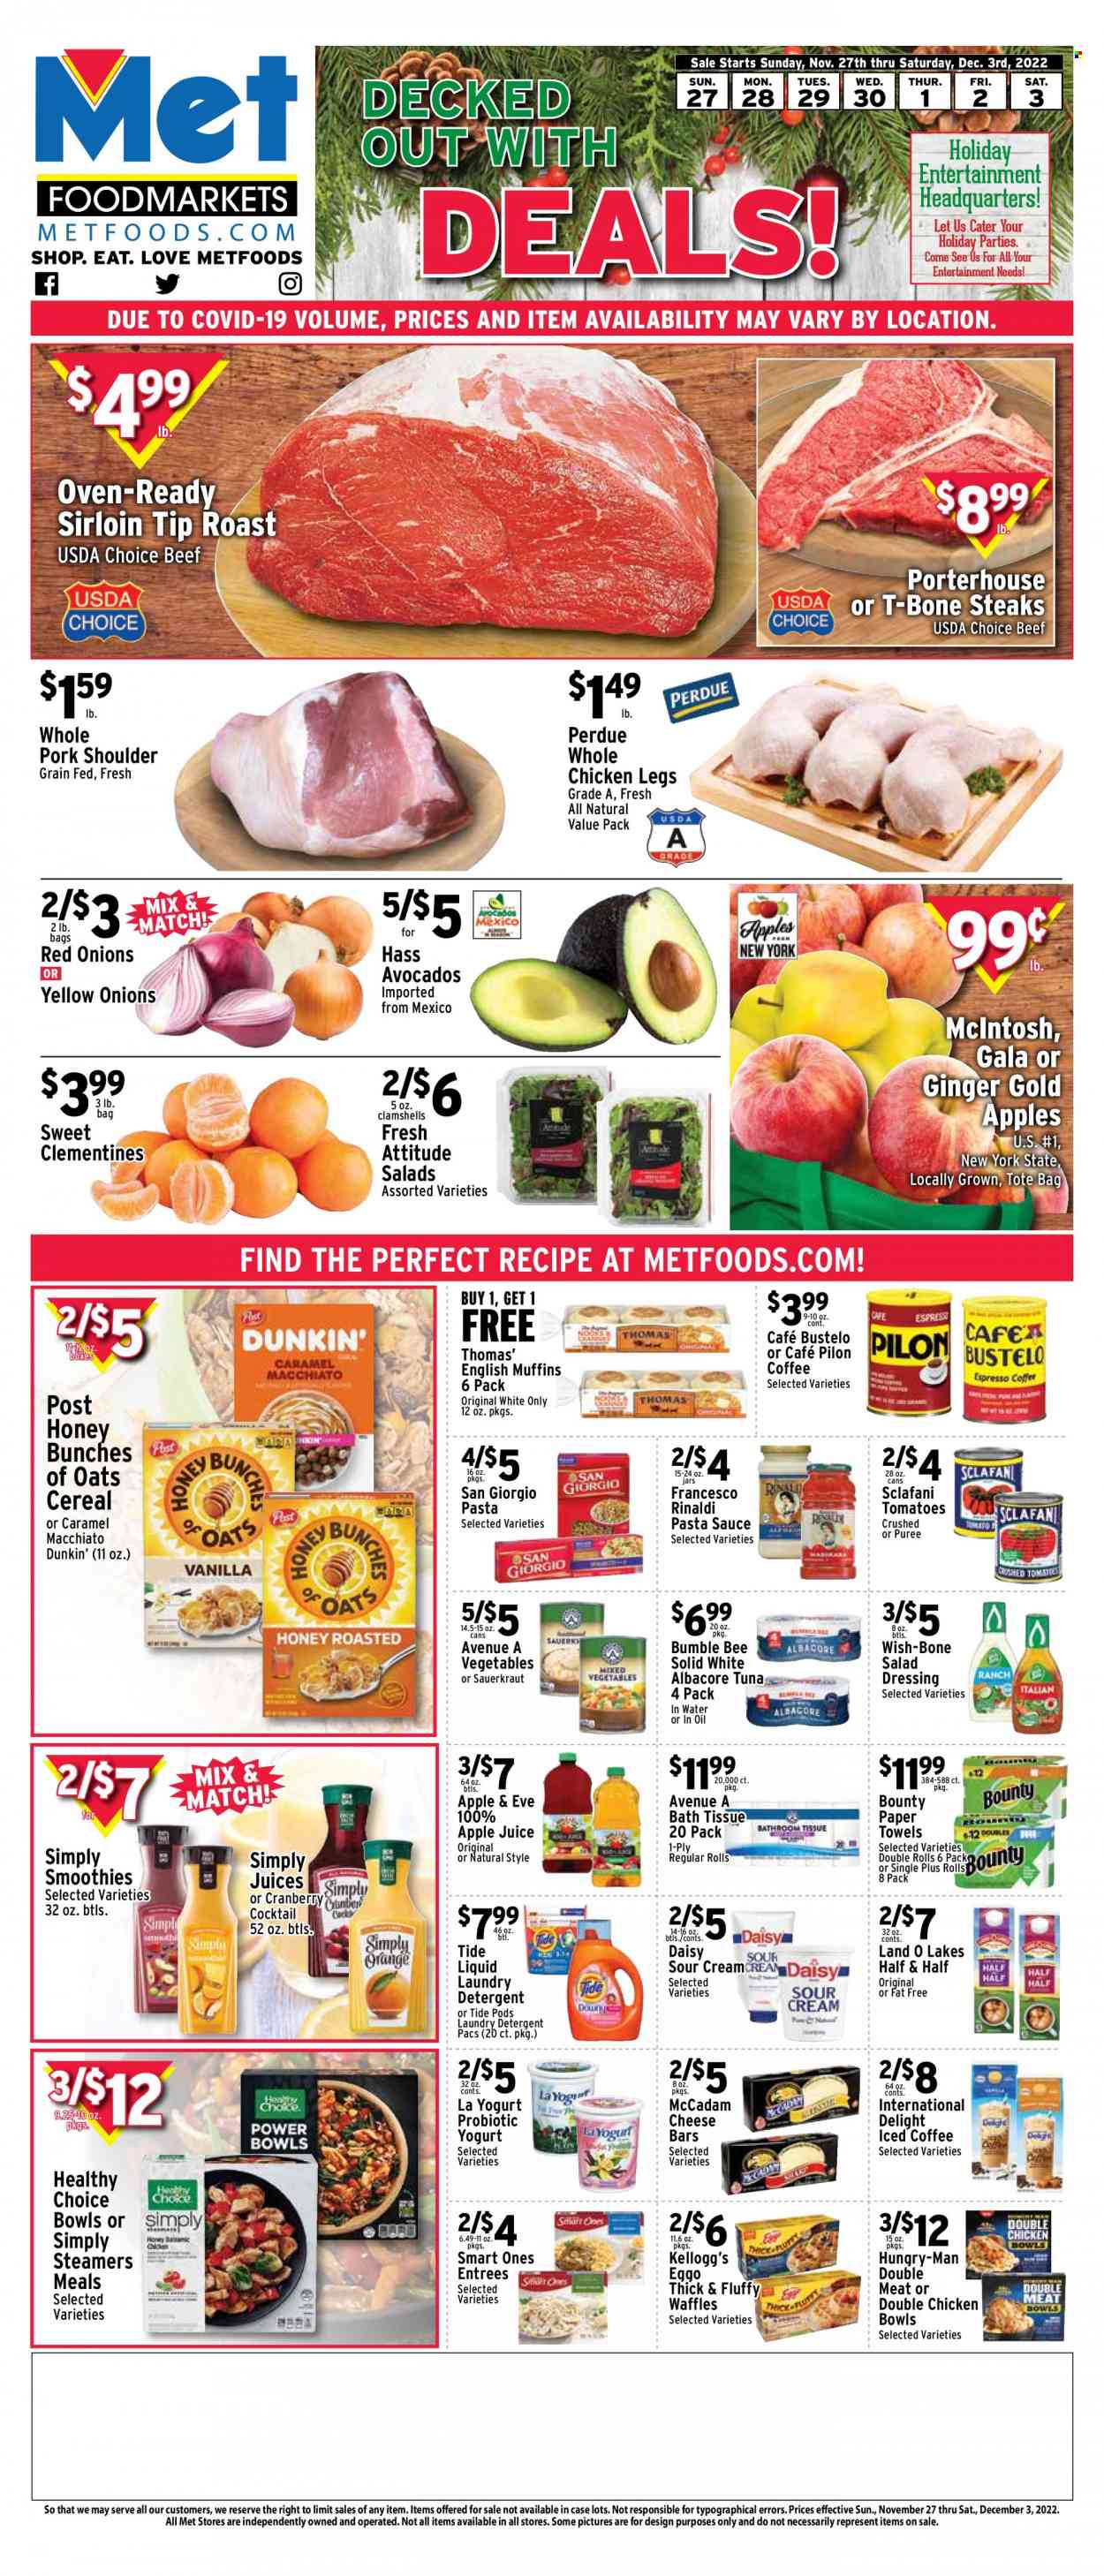 thumbnail - Met Foodmarkets Flyer - 11/27/2022 - 12/03/2022 - Sales products - english muffins, waffles, ginger, red onions, tomatoes, onion, avocado, Gala, tuna, pasta sauce, Bumble Bee, sauce, Healthy Choice, Perdue®, yoghurt, probiotic yoghurt, sour cream, Bounty, Kellogg's, sauerkraut, cereals, salad dressing, dressing, apple juice, juice, smoothie, iced coffee, whole chicken, chicken legs, beef meat, t-bone steak, steak, pork meat, pork shoulder, clementines, Half and half. Page 1.